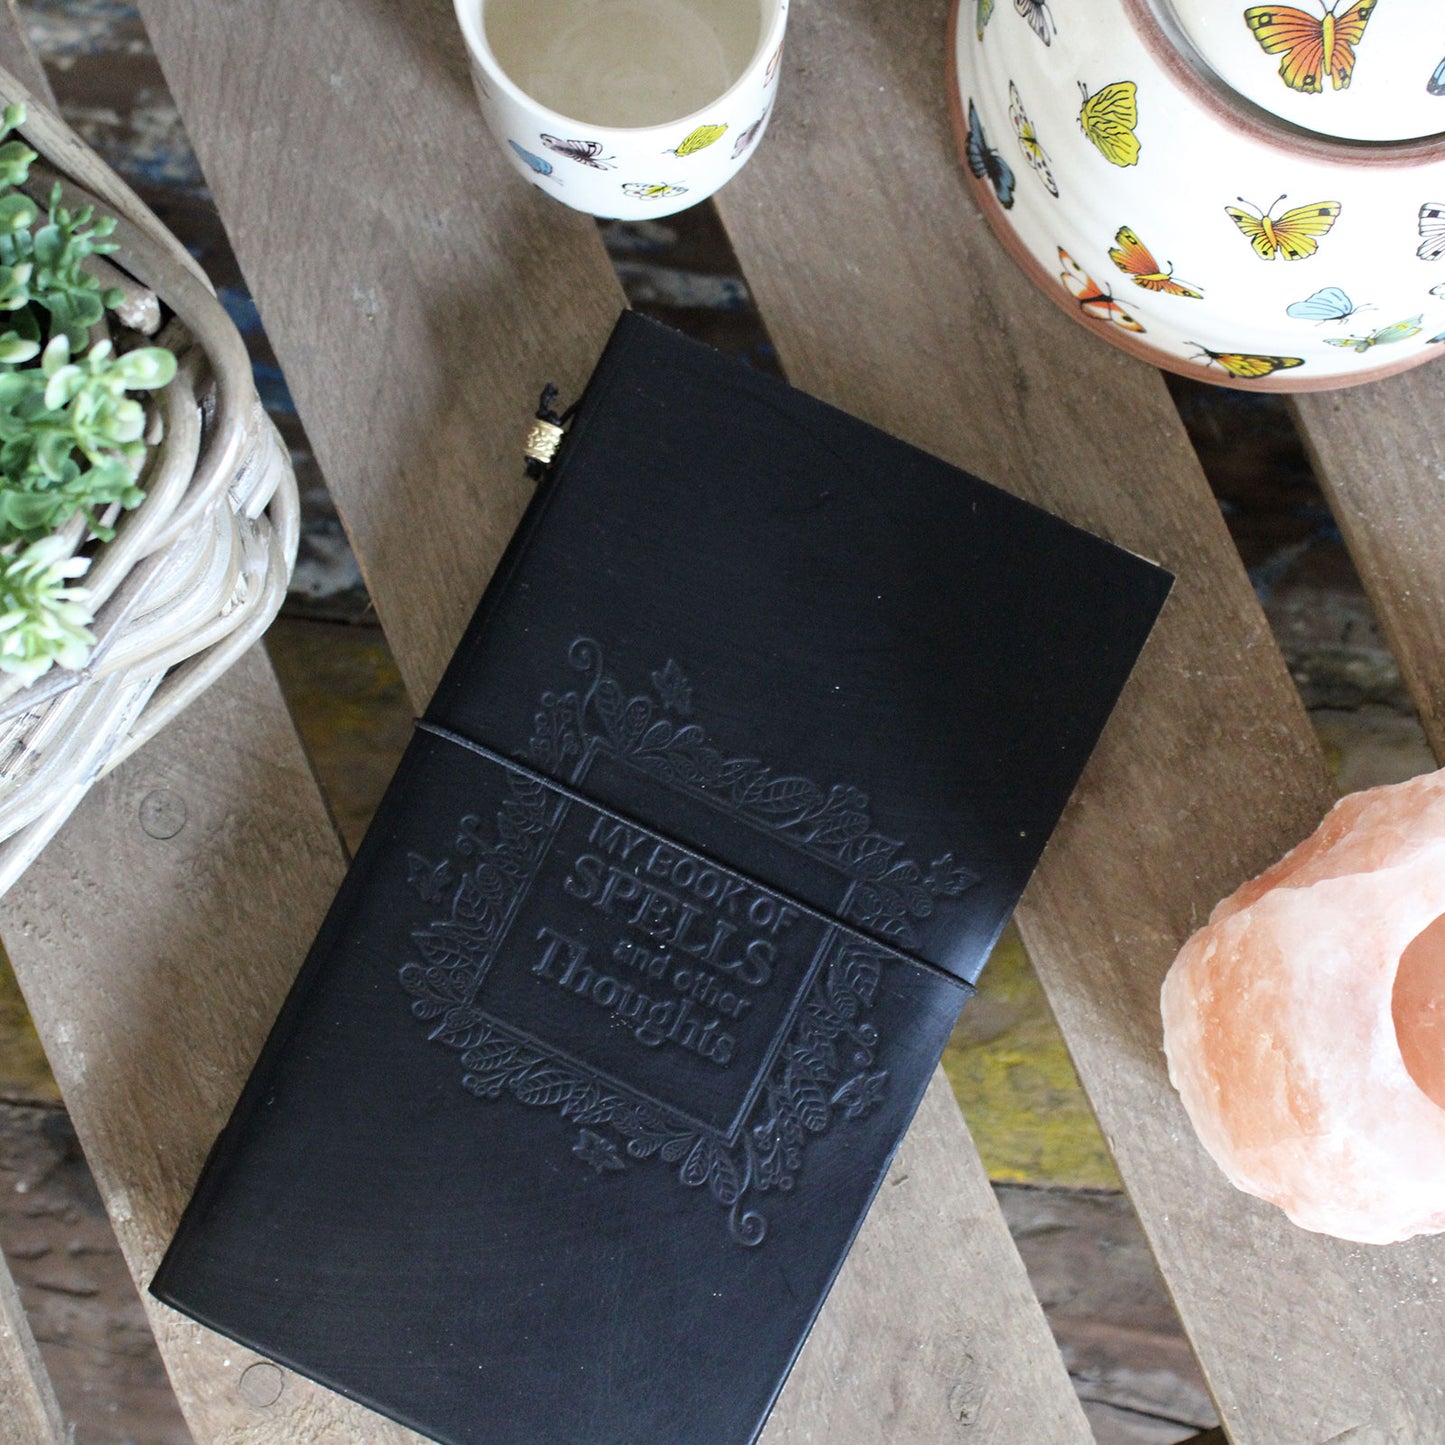 Handmade Leather Journal - My Book of Spells and other Thoughts - Black